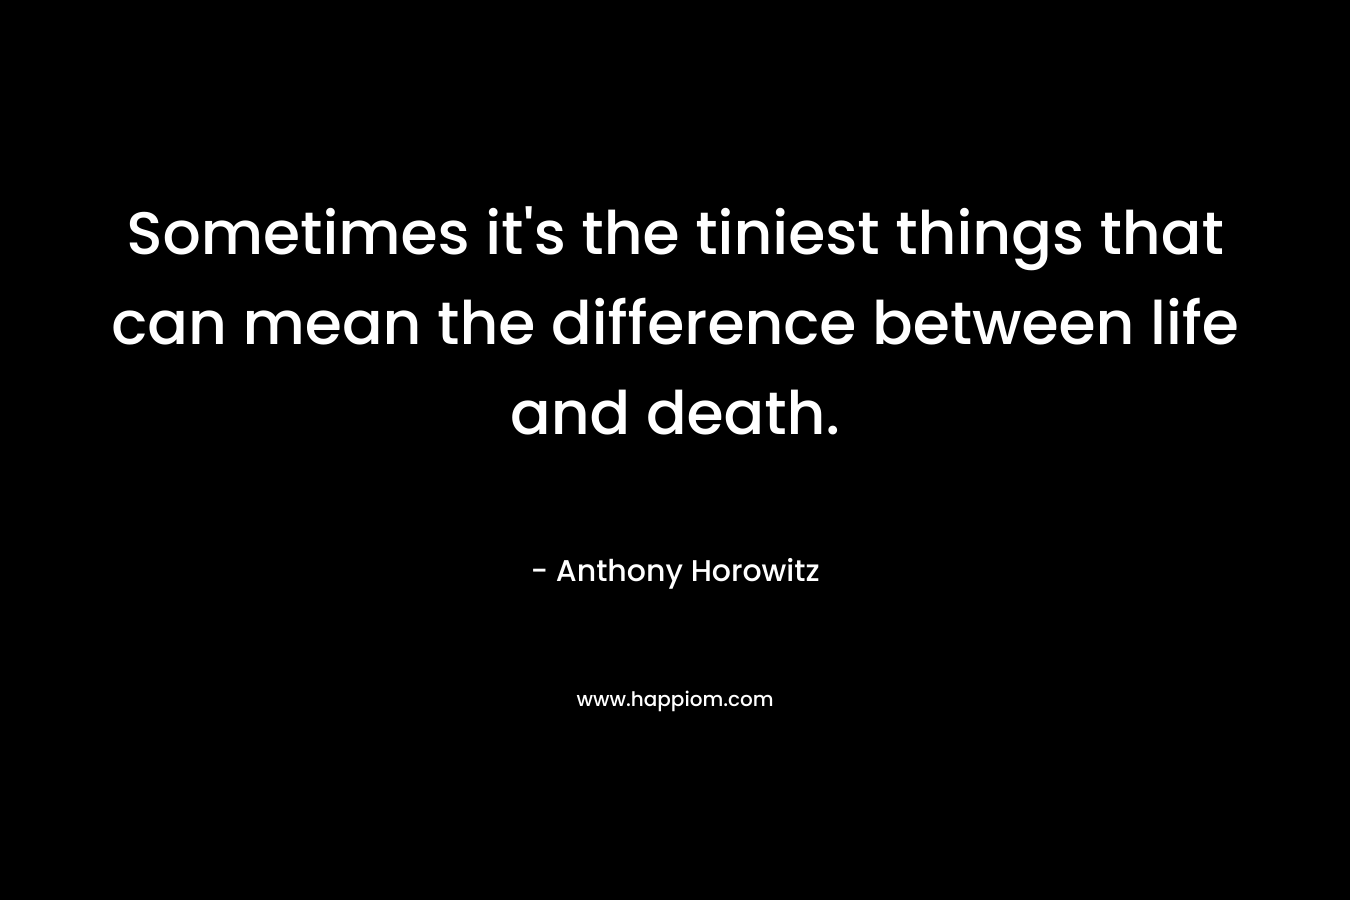 Sometimes it’s the tiniest things that can mean the difference between life and death. – Anthony Horowitz